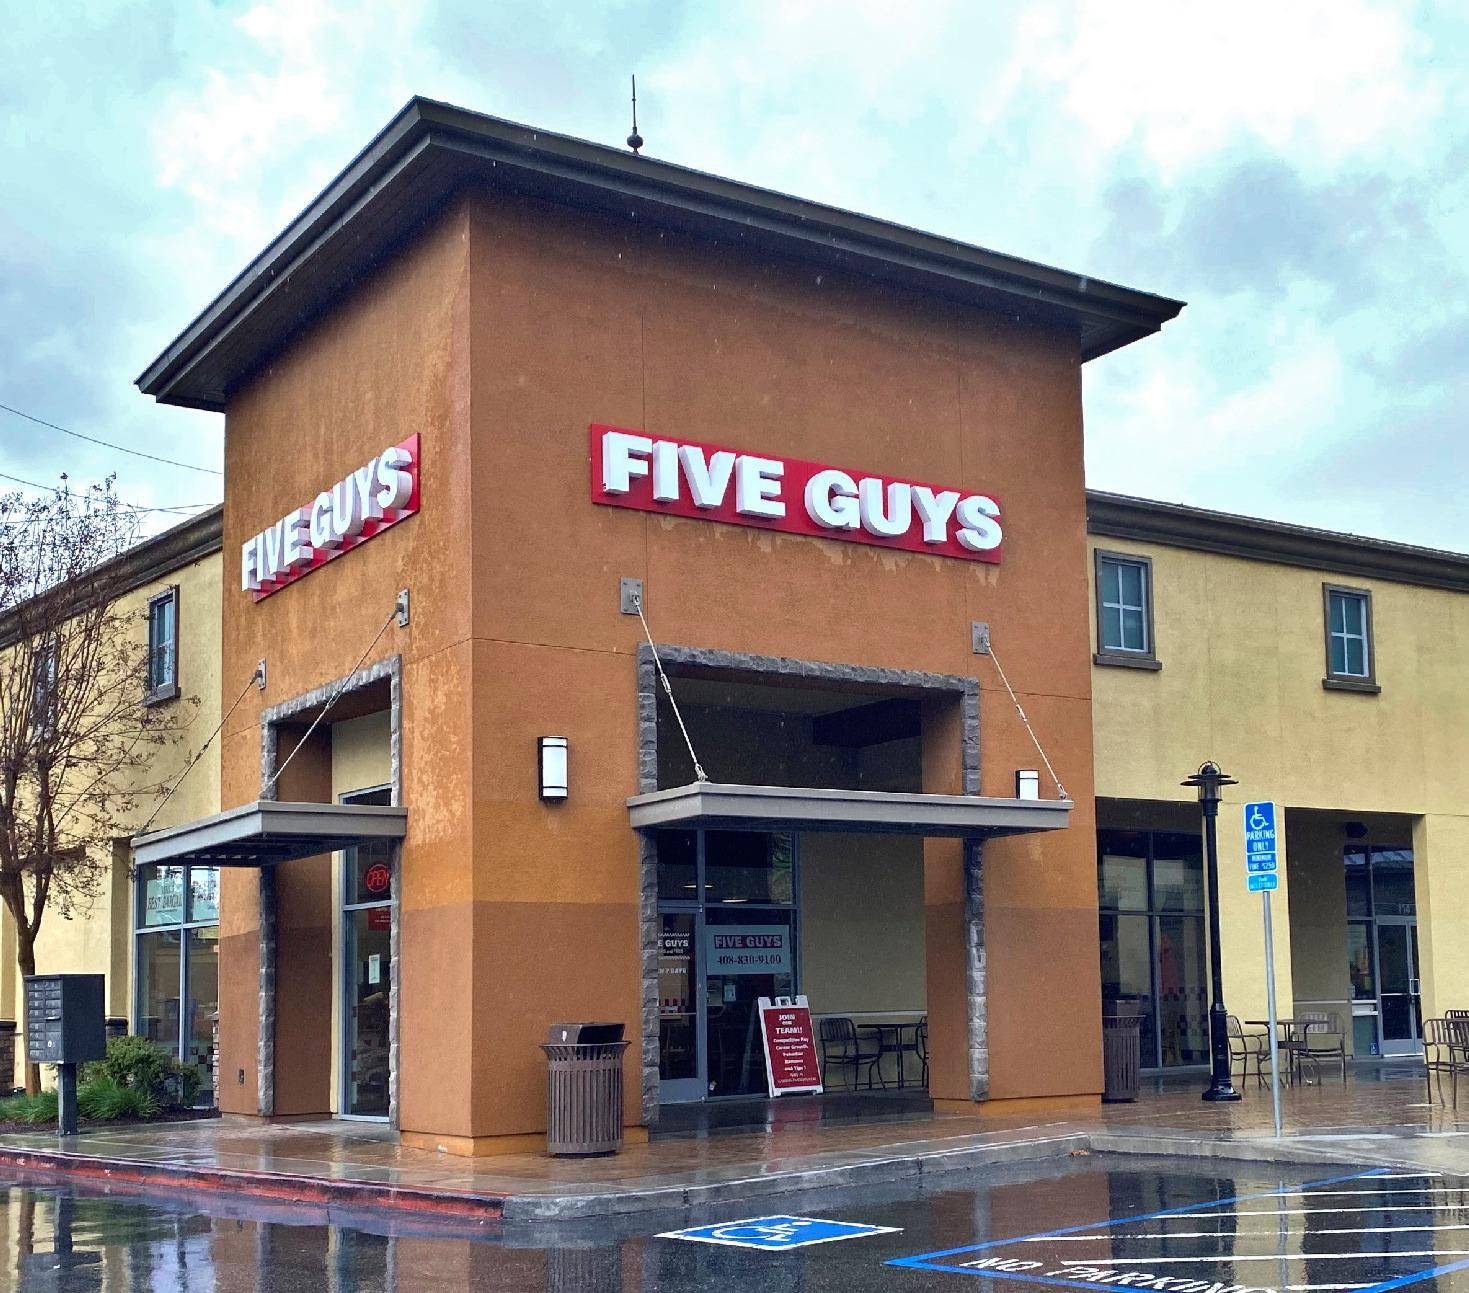 Exterior photograph of the Five Guys restaurant at 116 E. El Camino Real in Sunnyvale, California.